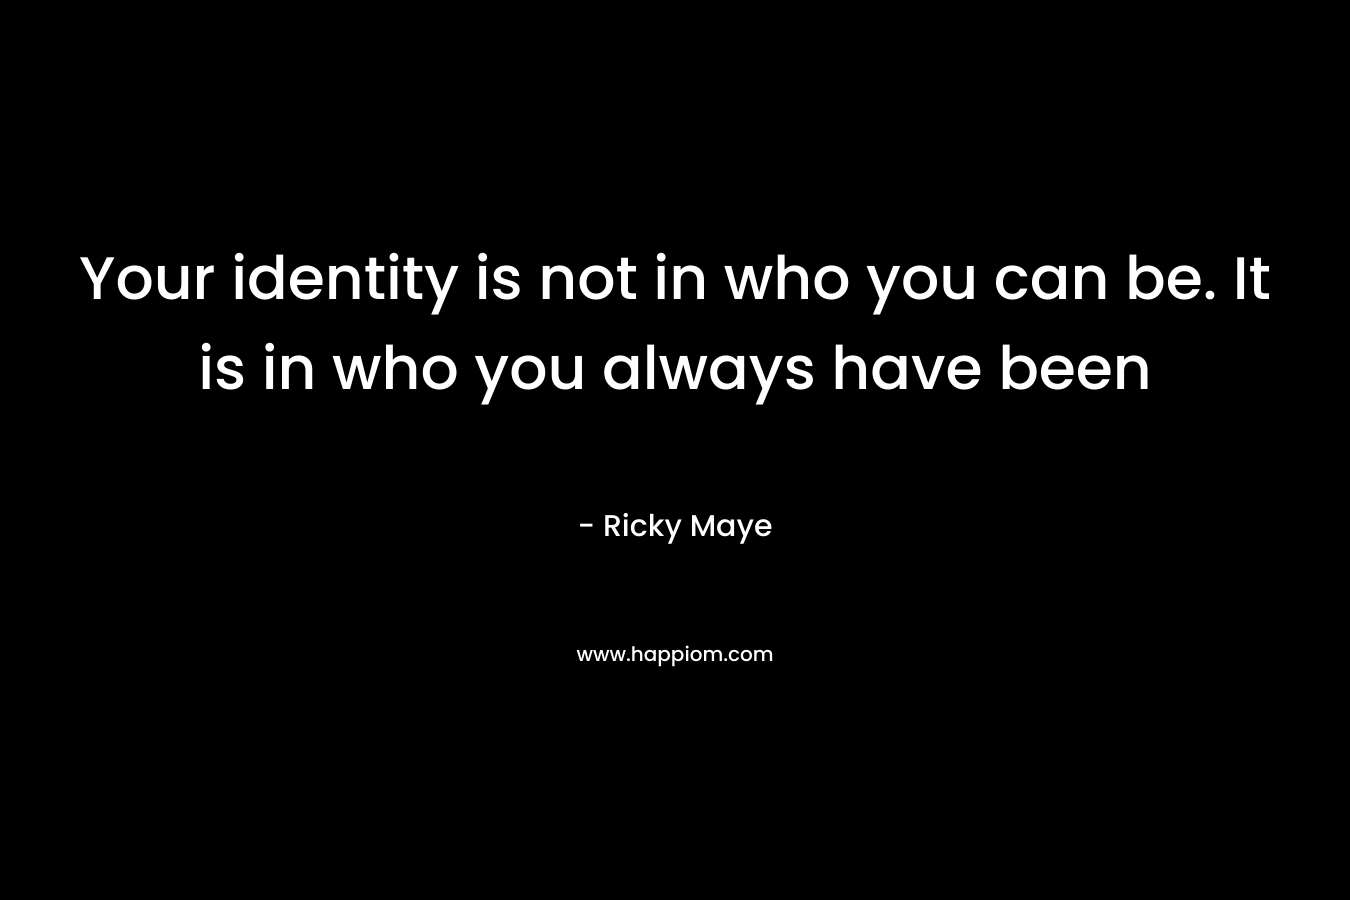 Your identity is not in who you can be. It is in who you always have been